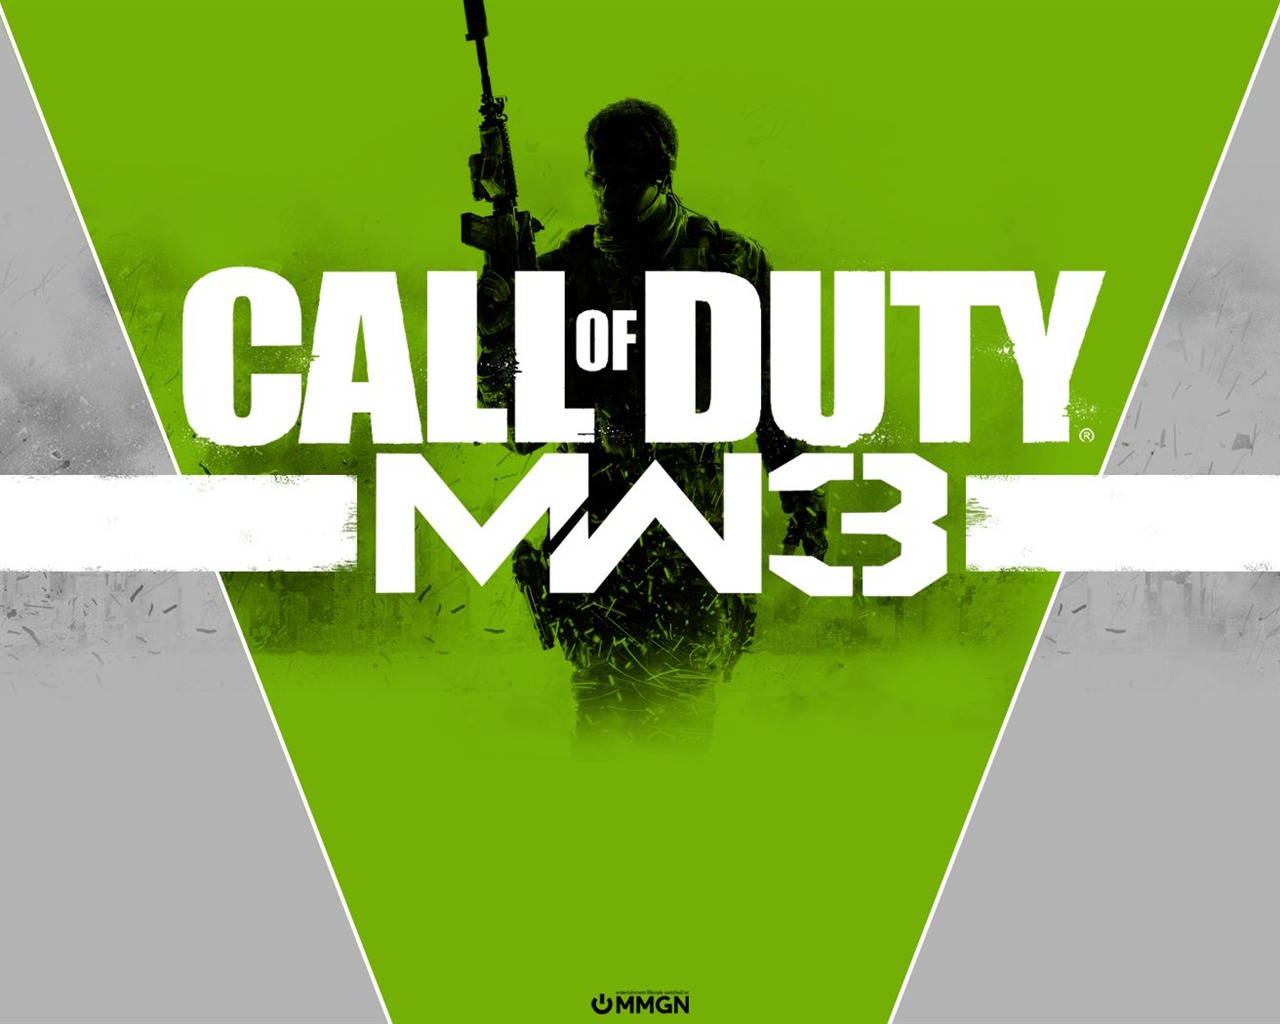 Call of Duty: MW3 HD wallpapers #10 - 1280x1024